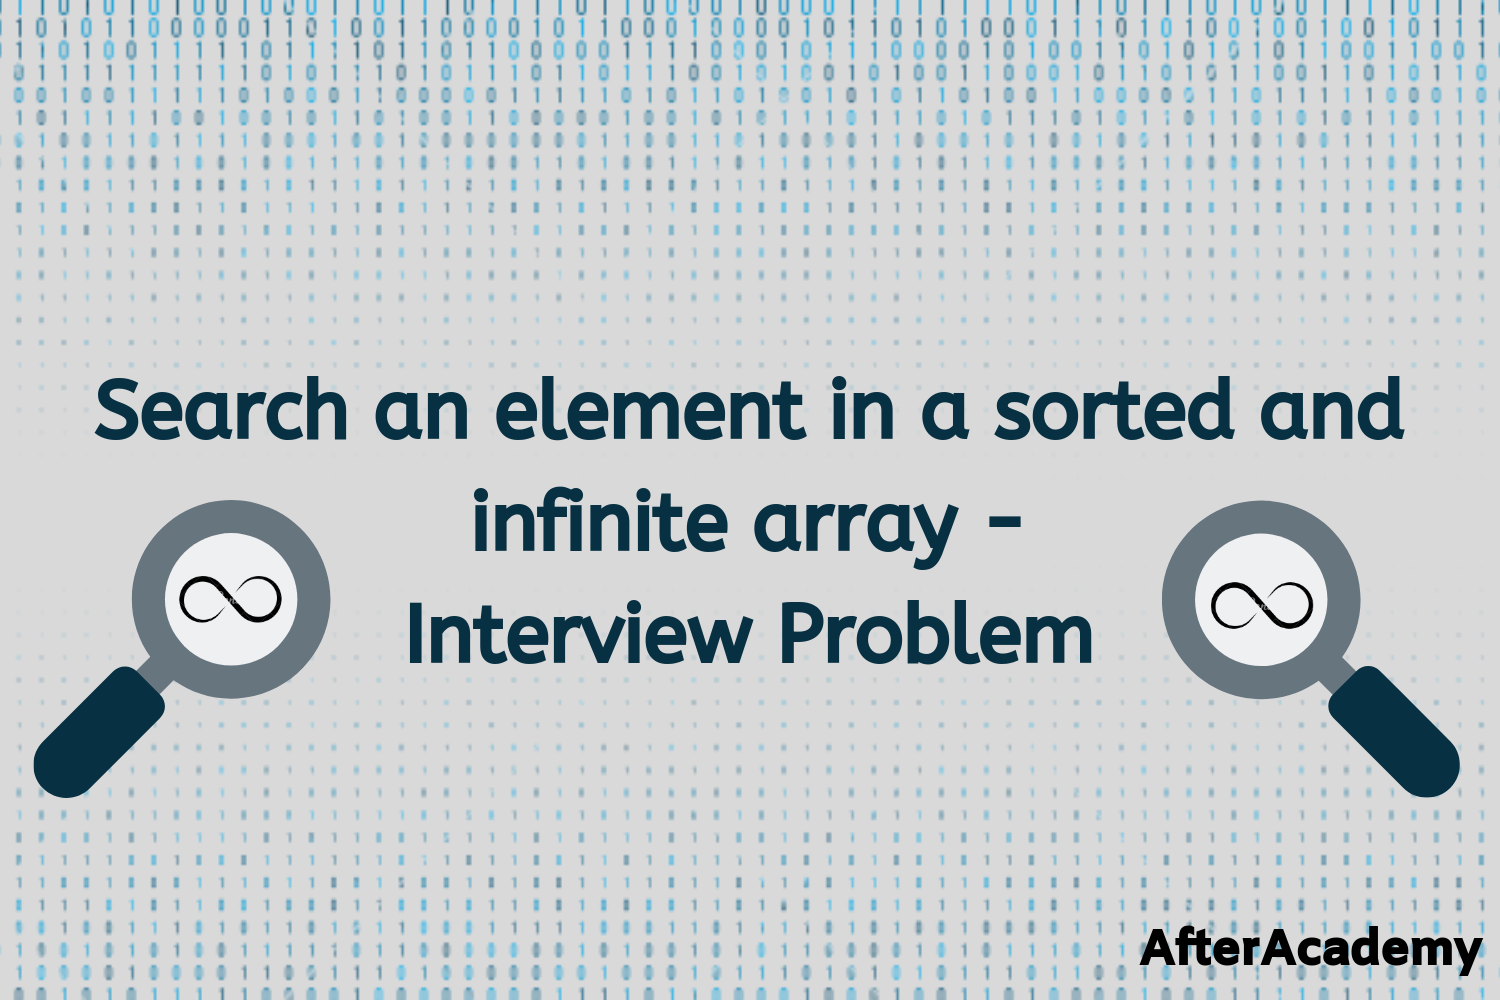 Search an element in a sorted and infinite array